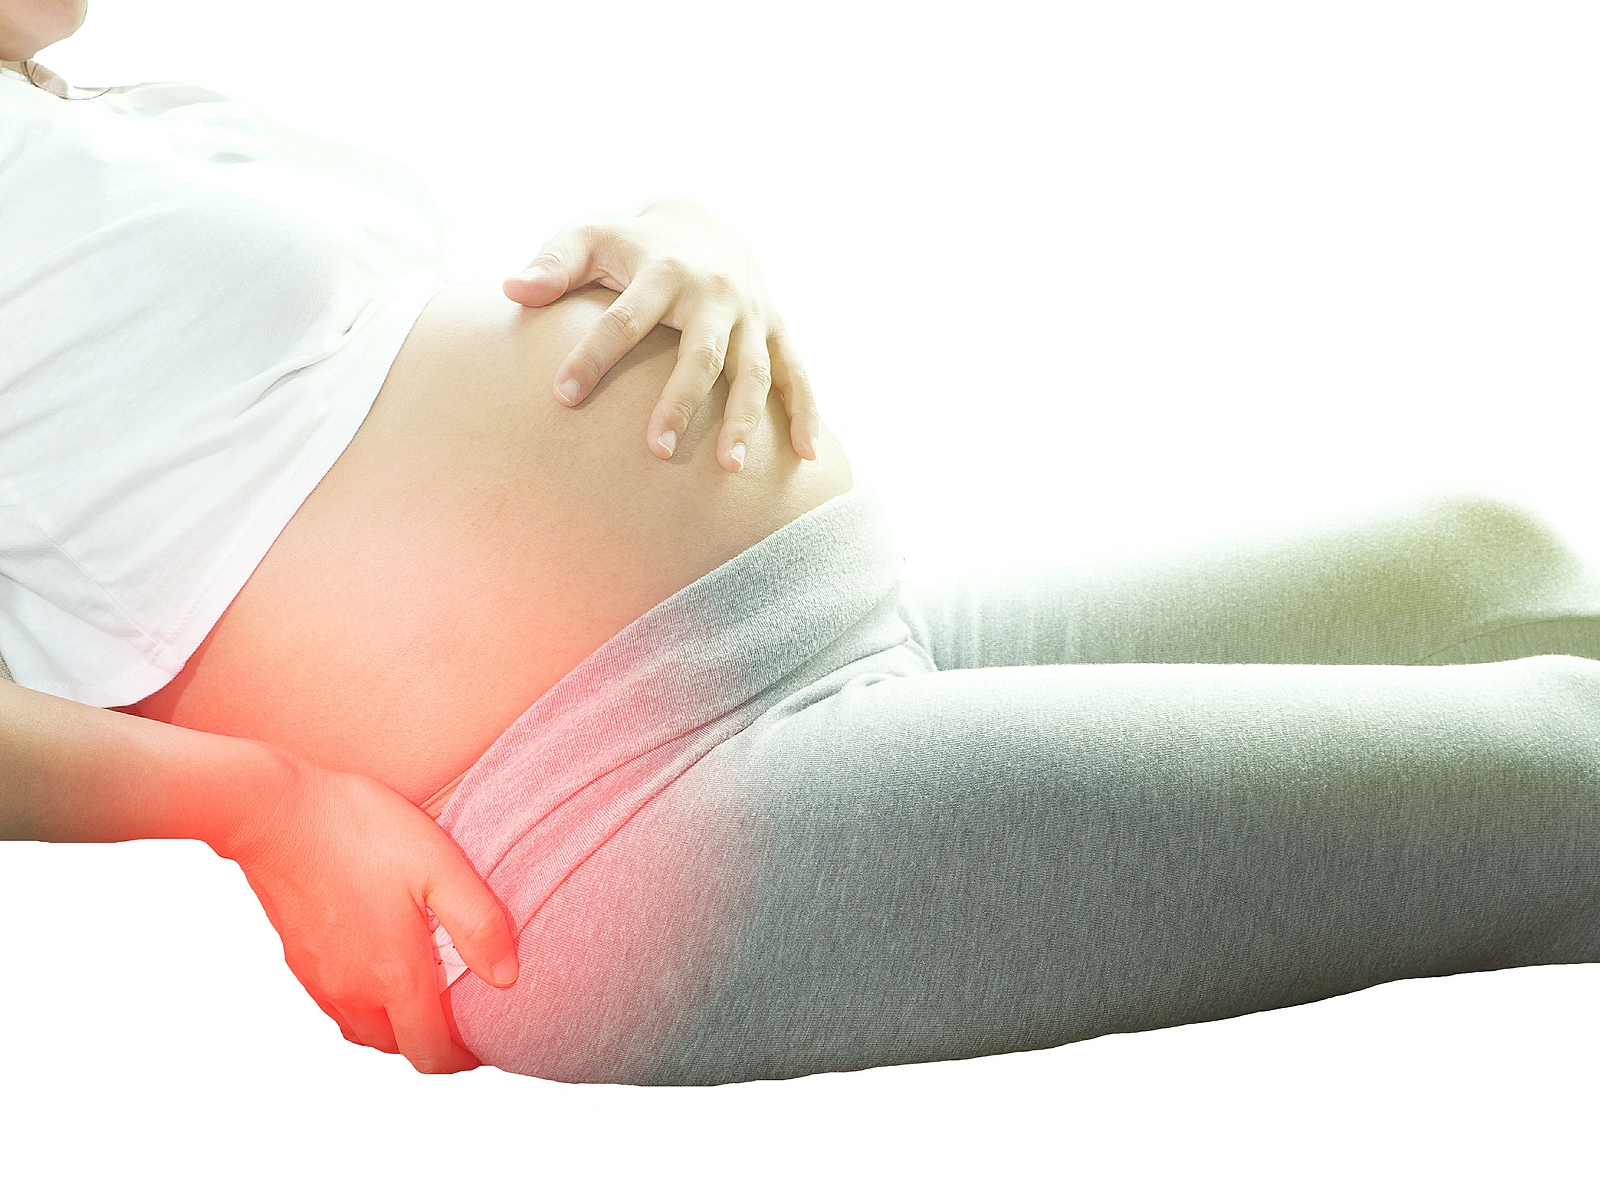 Back Pain During Pregnancy Chicago Chiropractic Physical Therapy MVP Chiro PT 60451 60602